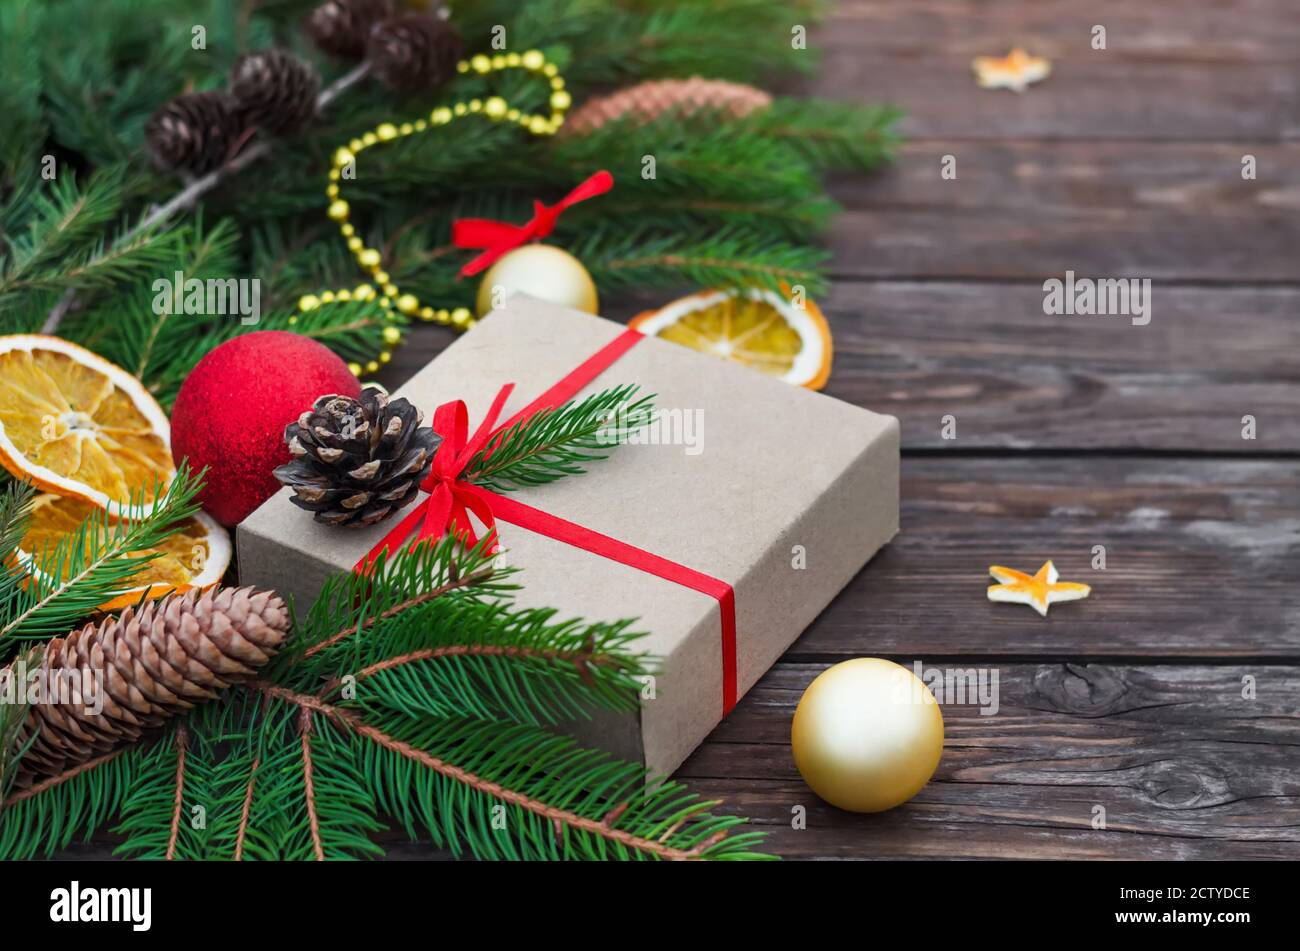 Christmas or New Year composition. Gift box with fir branches, cones and decorations on a vintage wooden background. Close-up, selective focus Stock Photo